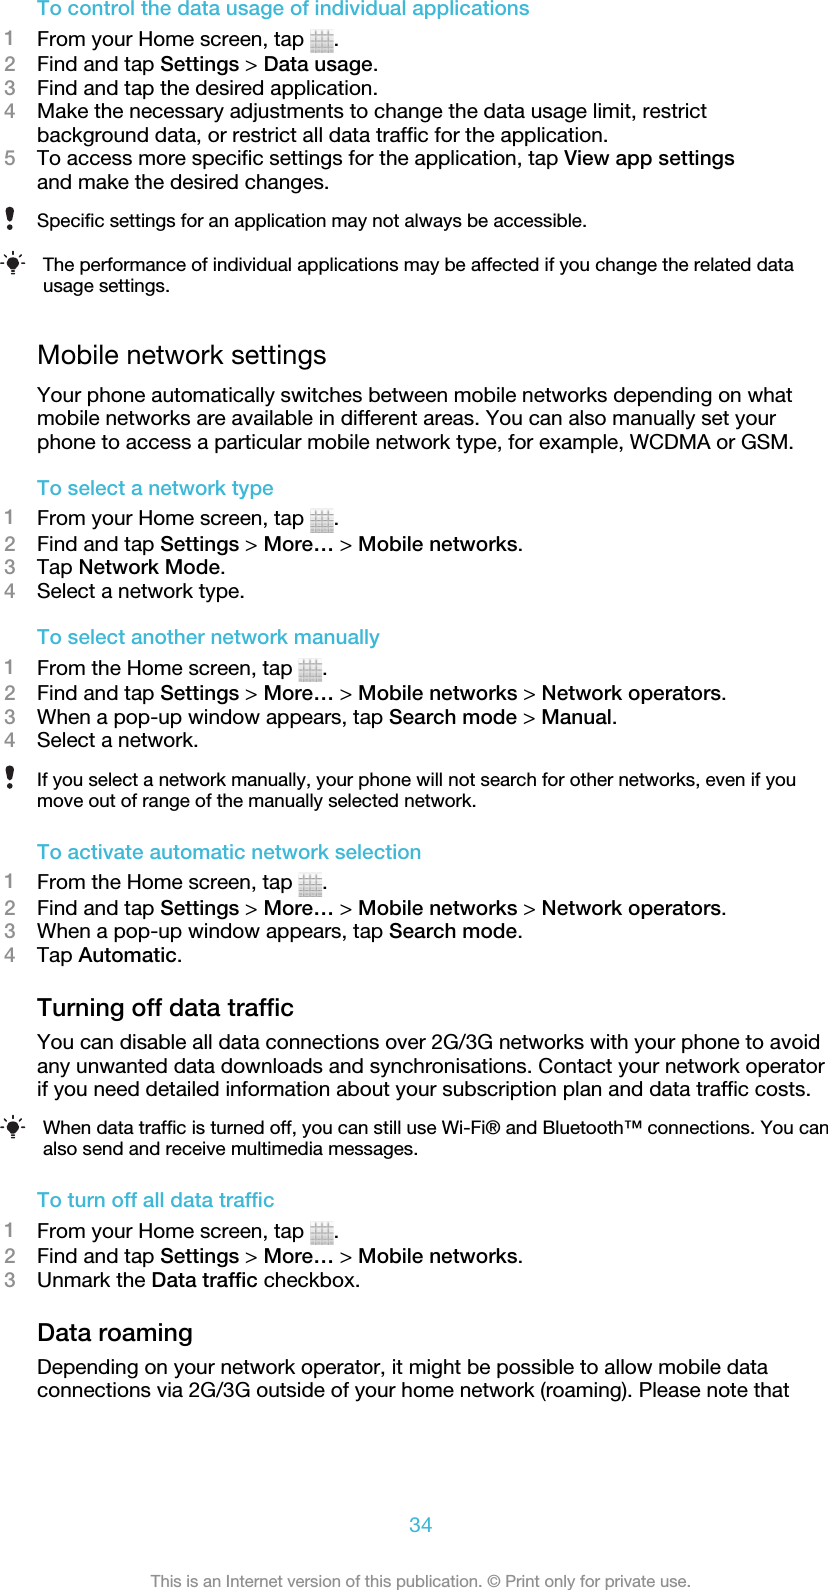 To control the data usage of individual applications1From your Home screen, tap  .2Find and tap Settings &gt; Data usage.3Find and tap the desired application.4Make the necessary adjustments to change the data usage limit, restrictbackground data, or restrict all data traffic for the application.5To access more specific settings for the application, tap View app settingsand make the desired changes.Specific settings for an application may not always be accessible.The performance of individual applications may be affected if you change the related datausage settings.Mobile network settingsYour phone automatically switches between mobile networks depending on whatmobile networks are available in different areas. You can also manually set yourphone to access a particular mobile network type, for example, WCDMA or GSM.To select a network type1From your Home screen, tap  .2Find and tap Settings &gt; More… &gt; Mobile networks.3Tap Network Mode.4Select a network type.To select another network manually1From the Home screen, tap  .2Find and tap Settings &gt; More… &gt; Mobile networks &gt; Network operators.3When a pop-up window appears, tap Search mode &gt; Manual.4Select a network.If you select a network manually, your phone will not search for other networks, even if youmove out of range of the manually selected network.To activate automatic network selection1From the Home screen, tap  .2Find and tap Settings &gt; More… &gt; Mobile networks &gt; Network operators.3When a pop-up window appears, tap Search mode.4Tap Automatic.Turning off data trafficYou can disable all data connections over 2G/3G networks with your phone to avoidany unwanted data downloads and synchronisations. Contact your network operatorif you need detailed information about your subscription plan and data traffic costs.When data traffic is turned off, you can still use Wi-Fi® and Bluetooth™ connections. You canalso send and receive multimedia messages.To turn off all data traffic1From your Home screen, tap  .2Find and tap Settings &gt; More… &gt; Mobile networks.3Unmark the Data traffic checkbox.Data roamingDepending on your network operator, it might be possible to allow mobile dataconnections via 2G/3G outside of your home network (roaming). Please note that34This is an Internet version of this publication. © Print only for private use.